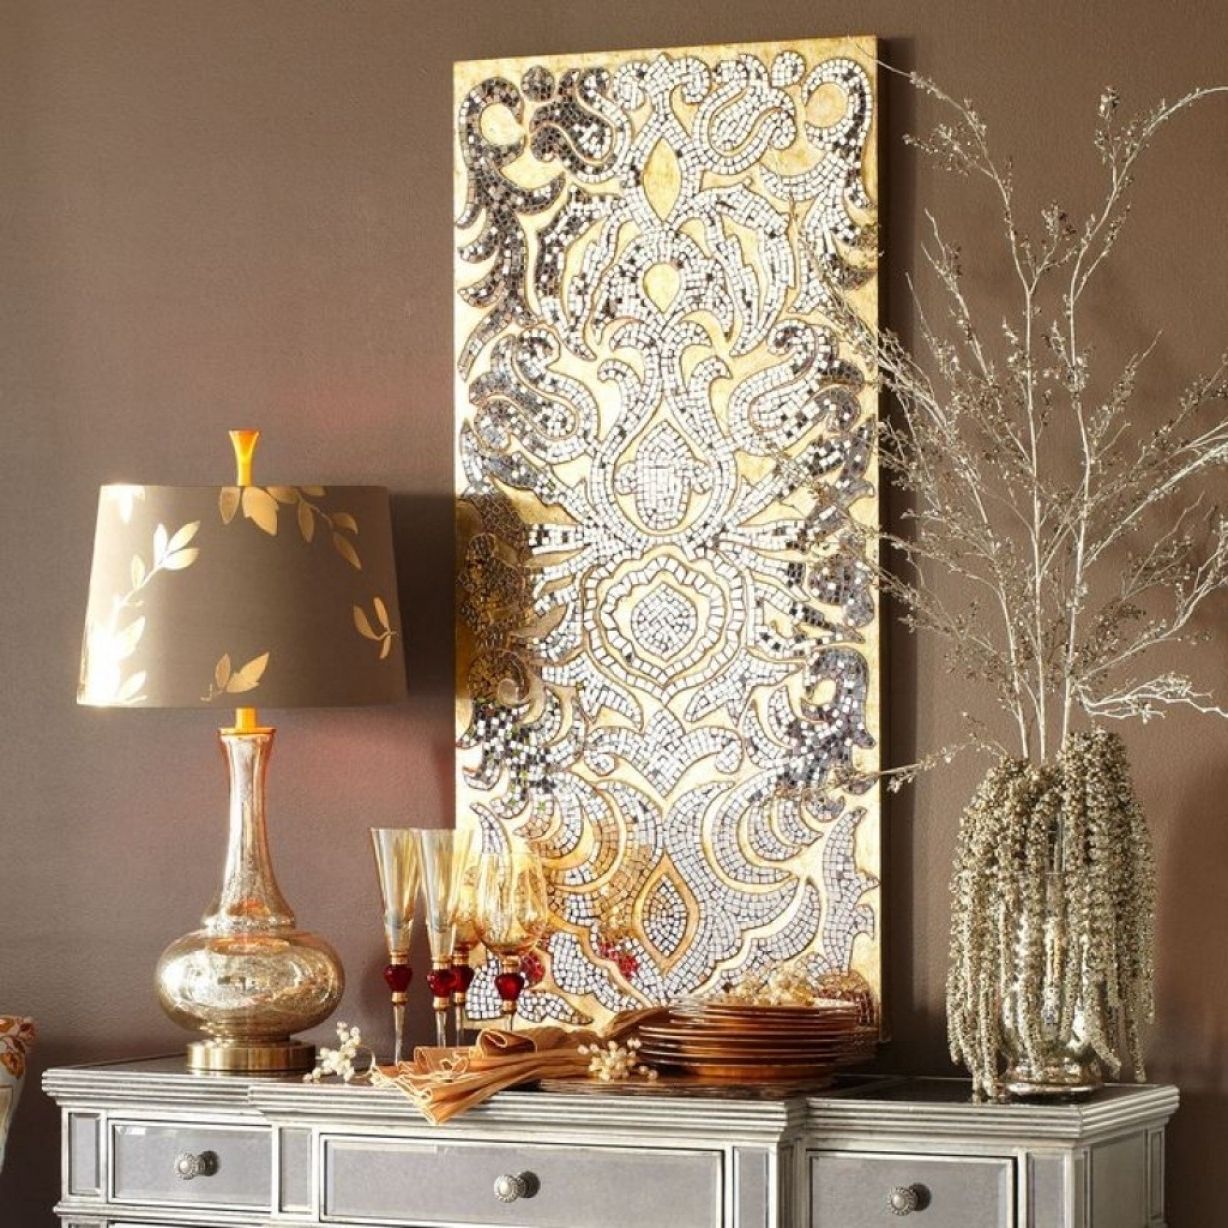 Beautiful Wall Mirrors: Reflections Of Style And Elegance